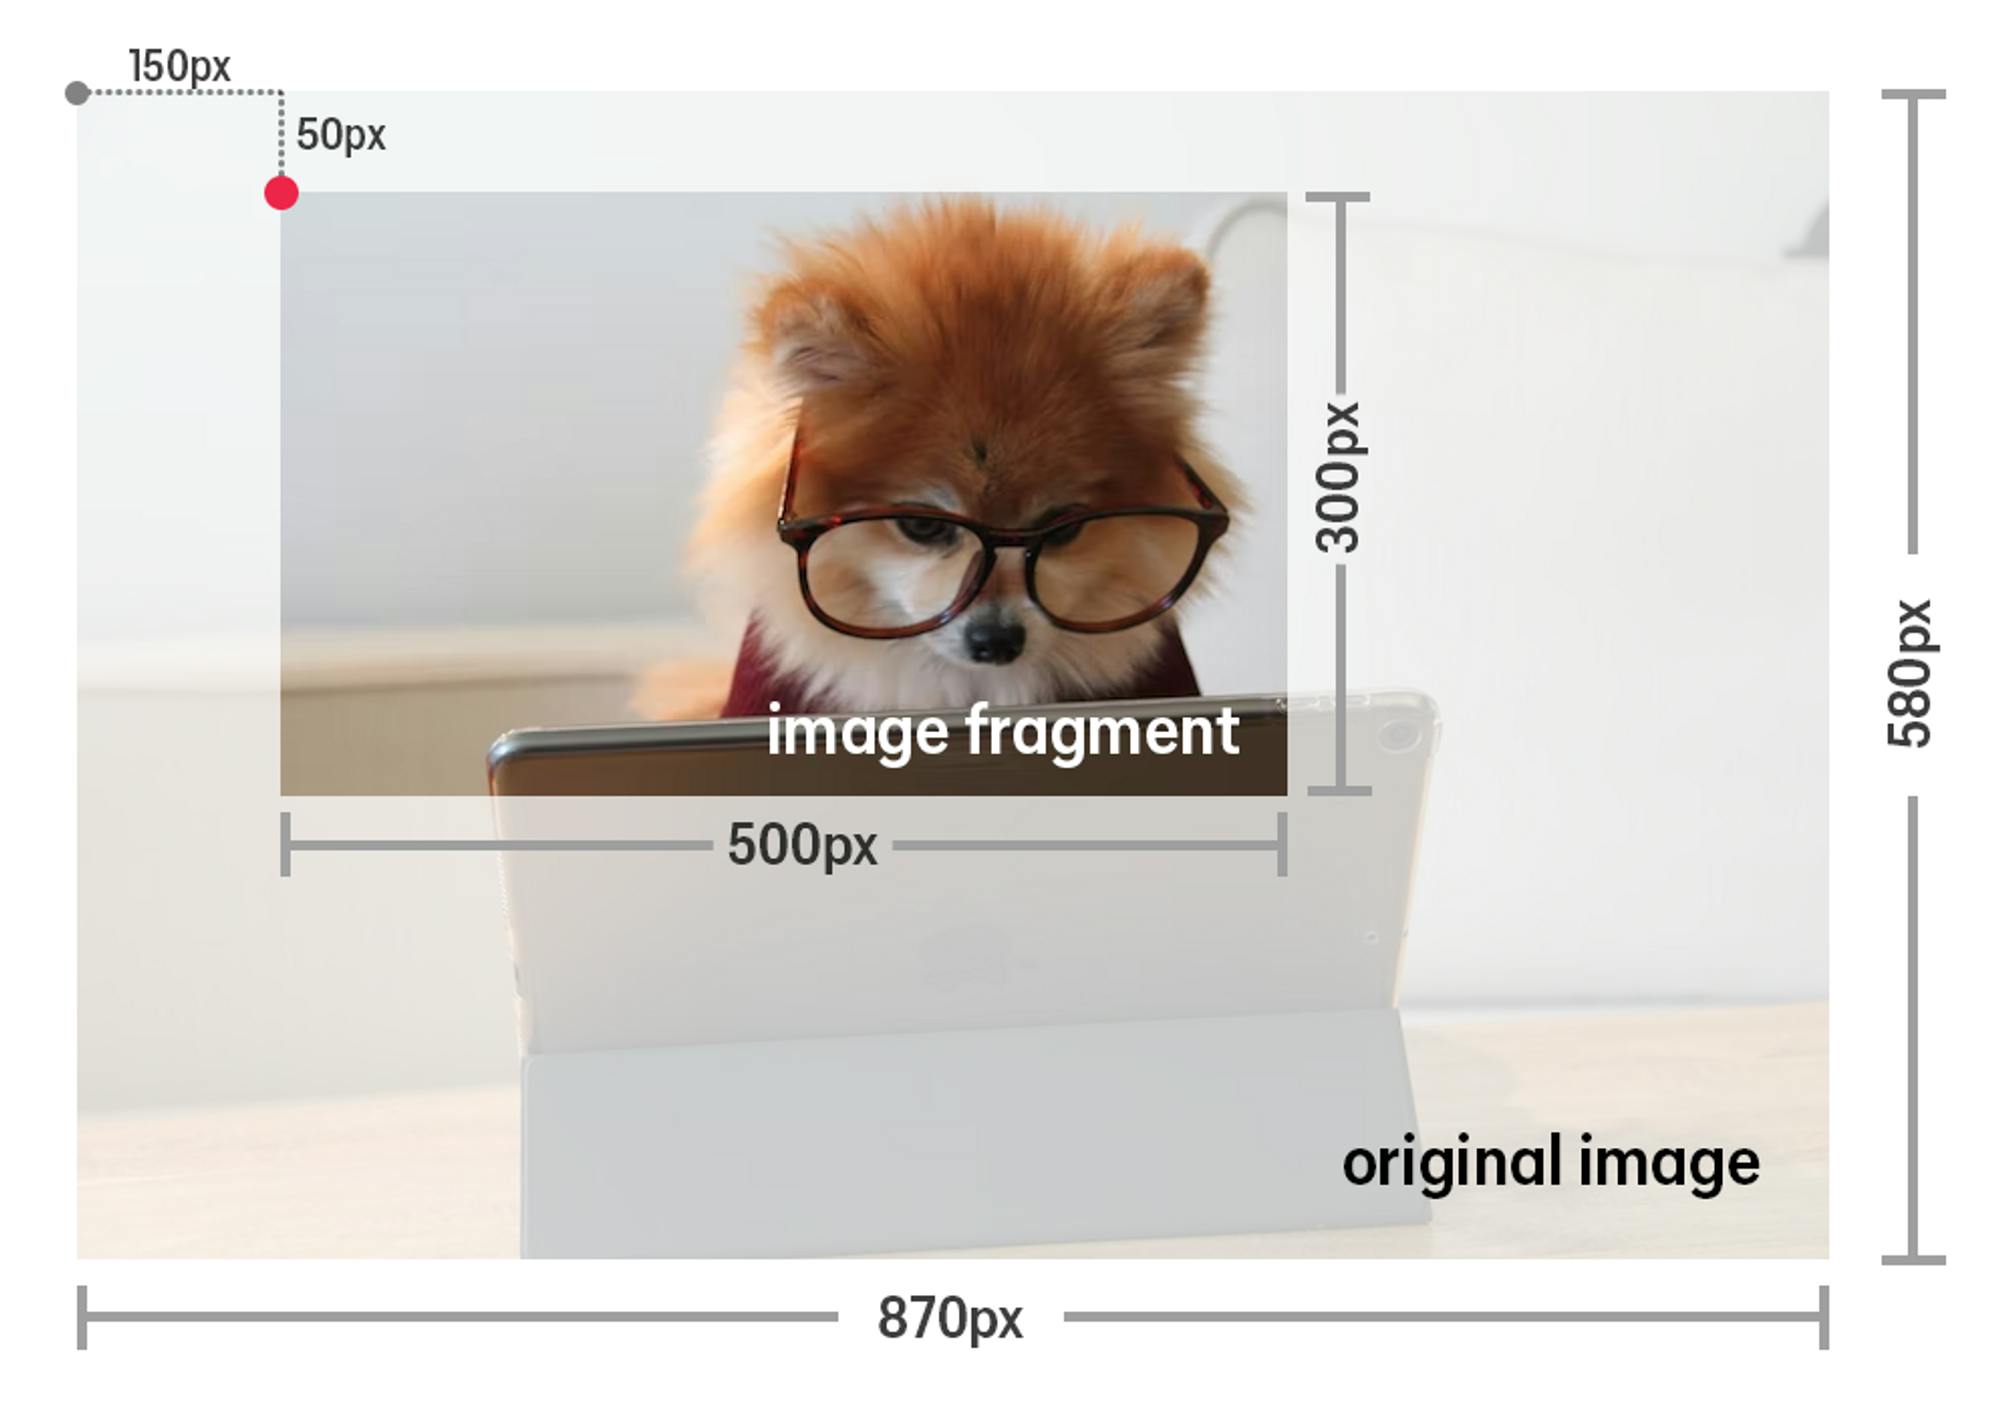 A photo of a puppy wearing glasses and looking at a computer has an overlay showing how it could be cropped using the image fragments noted in the previous paragraph.